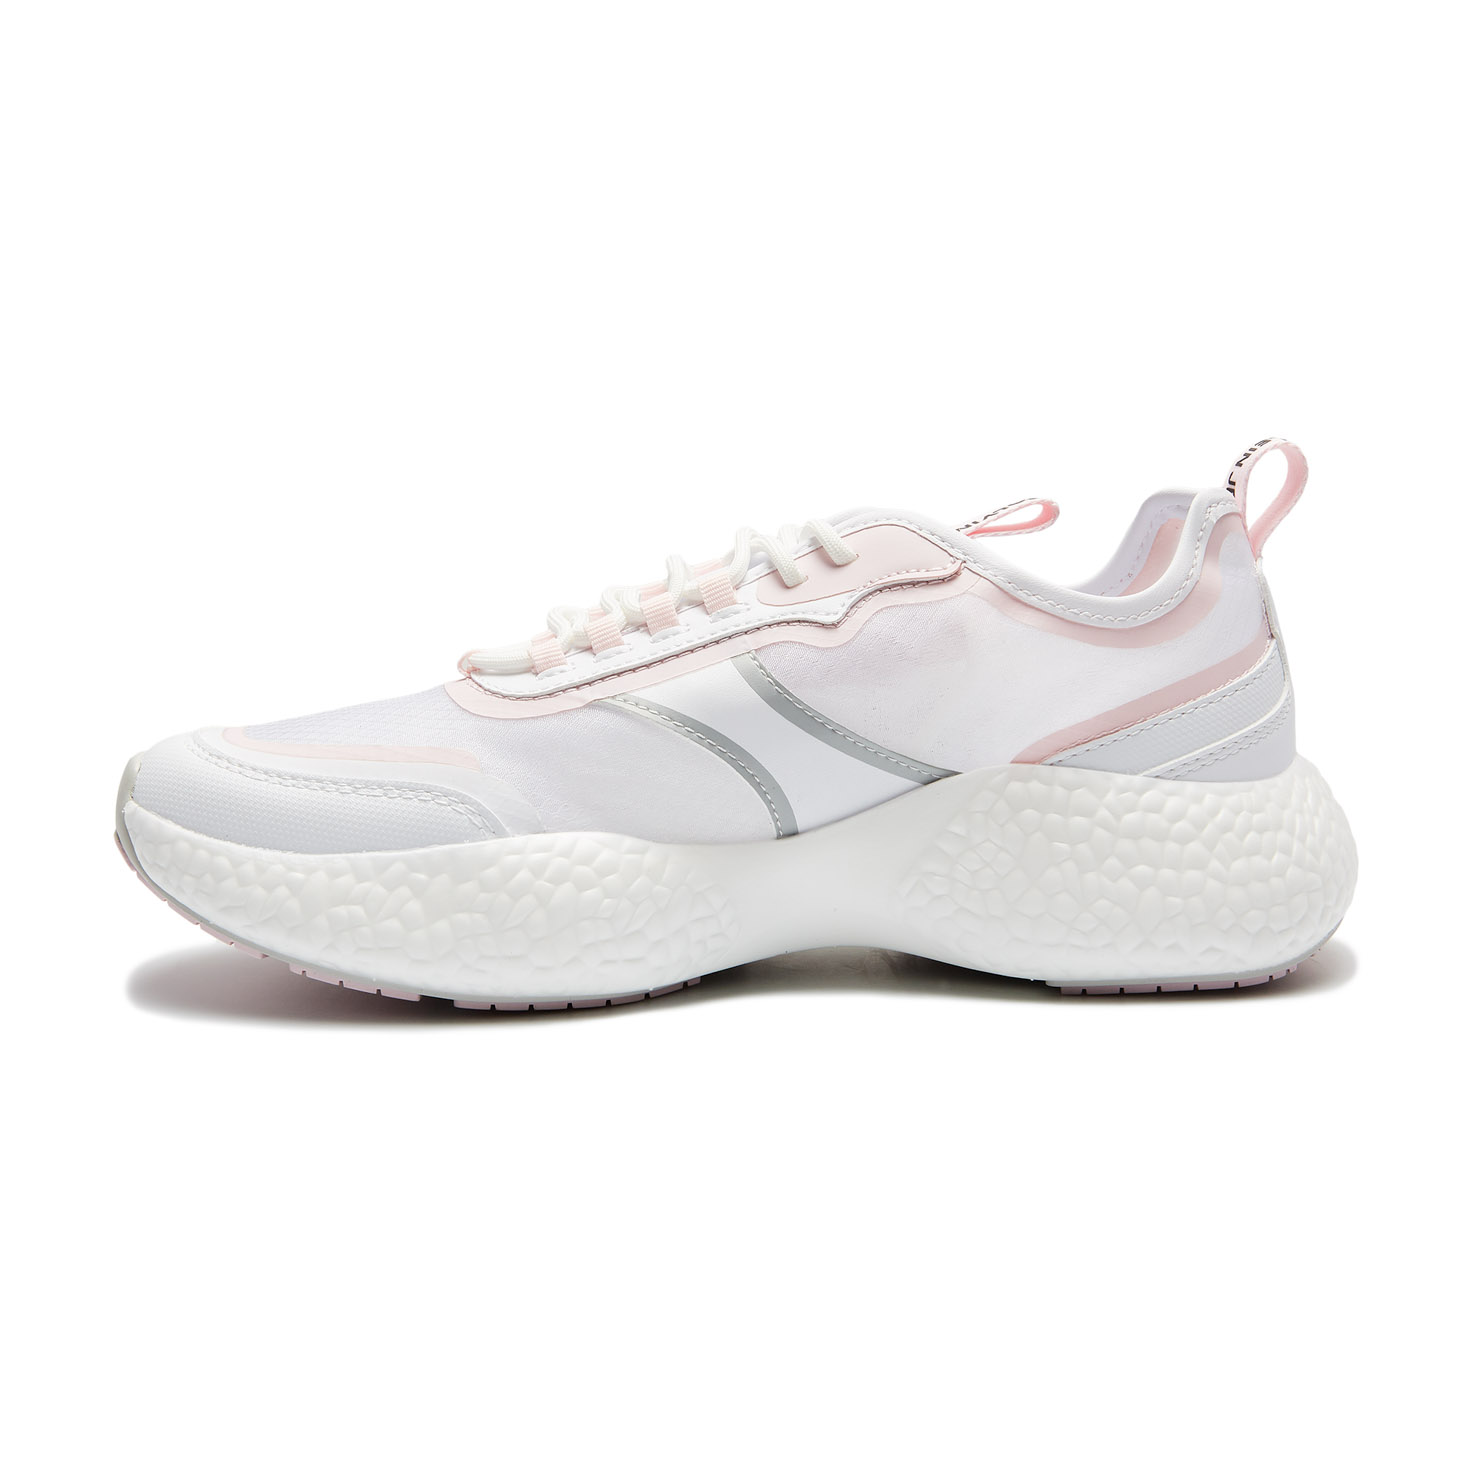 RUNNER SNEAKER LACEUP PU-NY CALVIN KLEIN, размер 36, цвет белый CKYW0YW00086 - фото 5